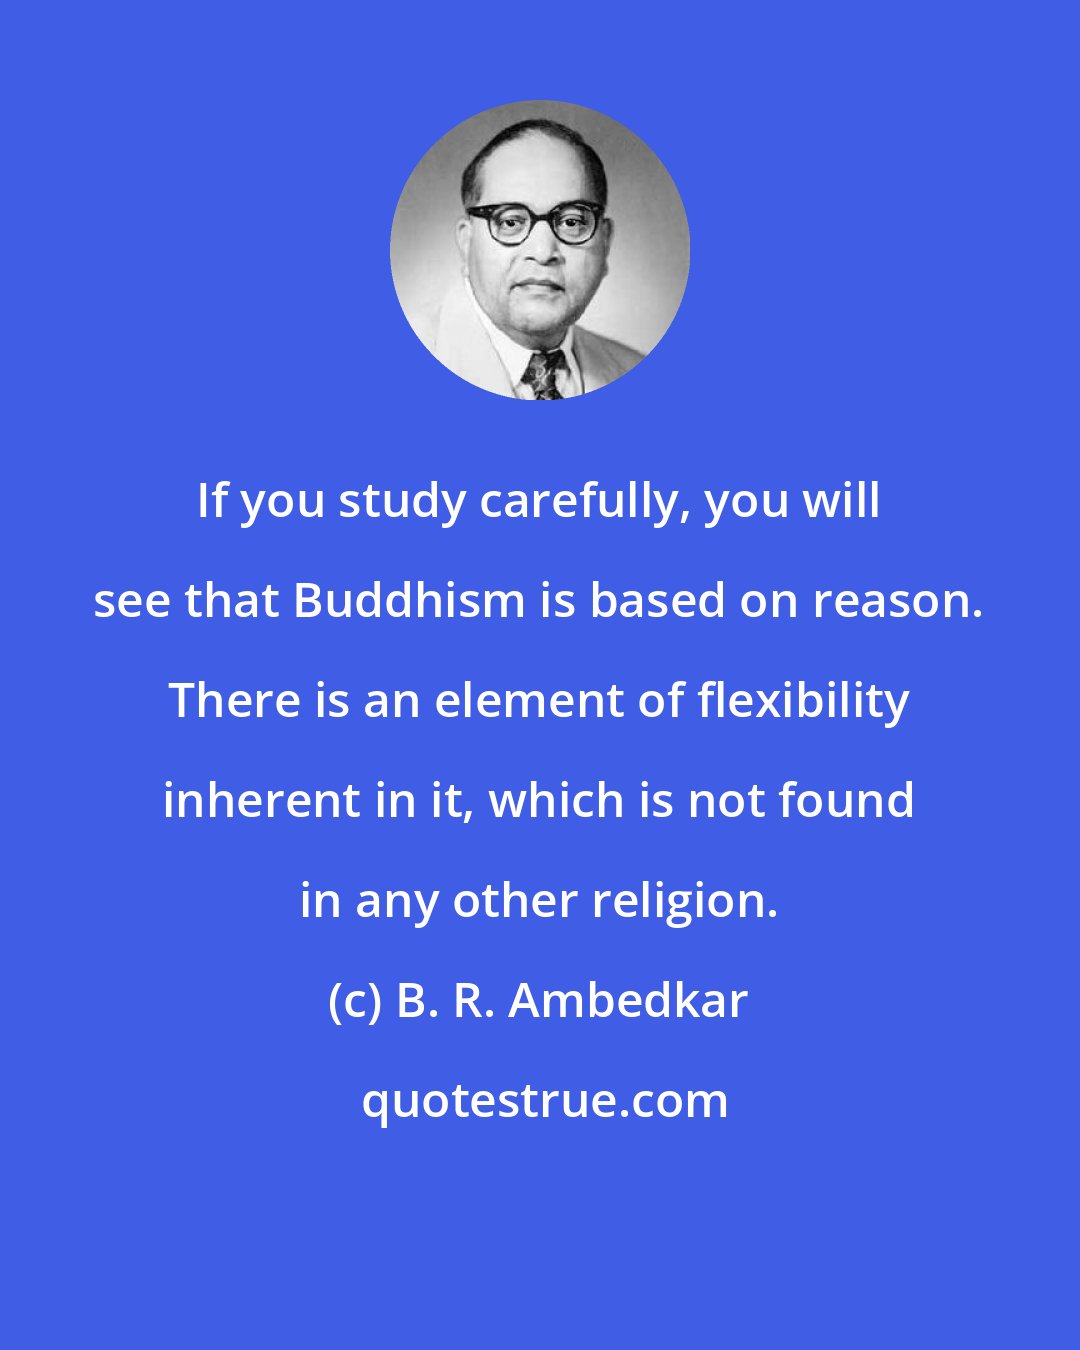 B. R. Ambedkar: If you study carefully, you will see that Buddhism is based on reason. There is an element of flexibility inherent in it, which is not found in any other religion.